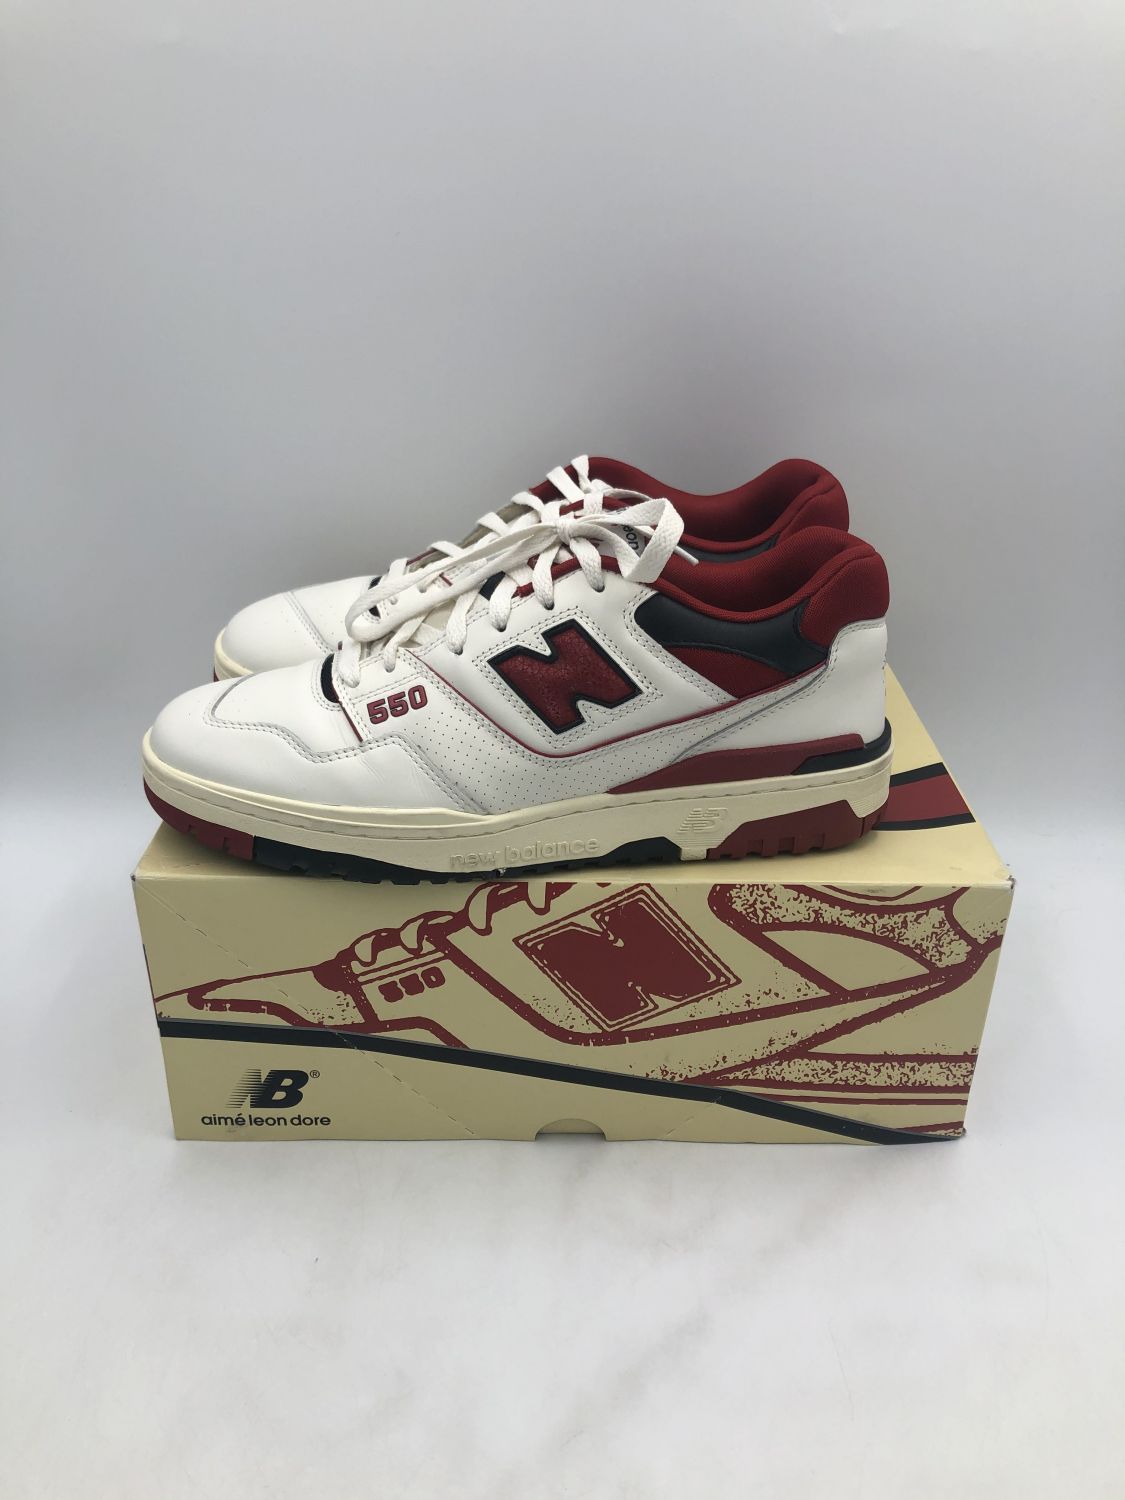 New Balance 550 Aime Leon Dore White Red | AfterMarket